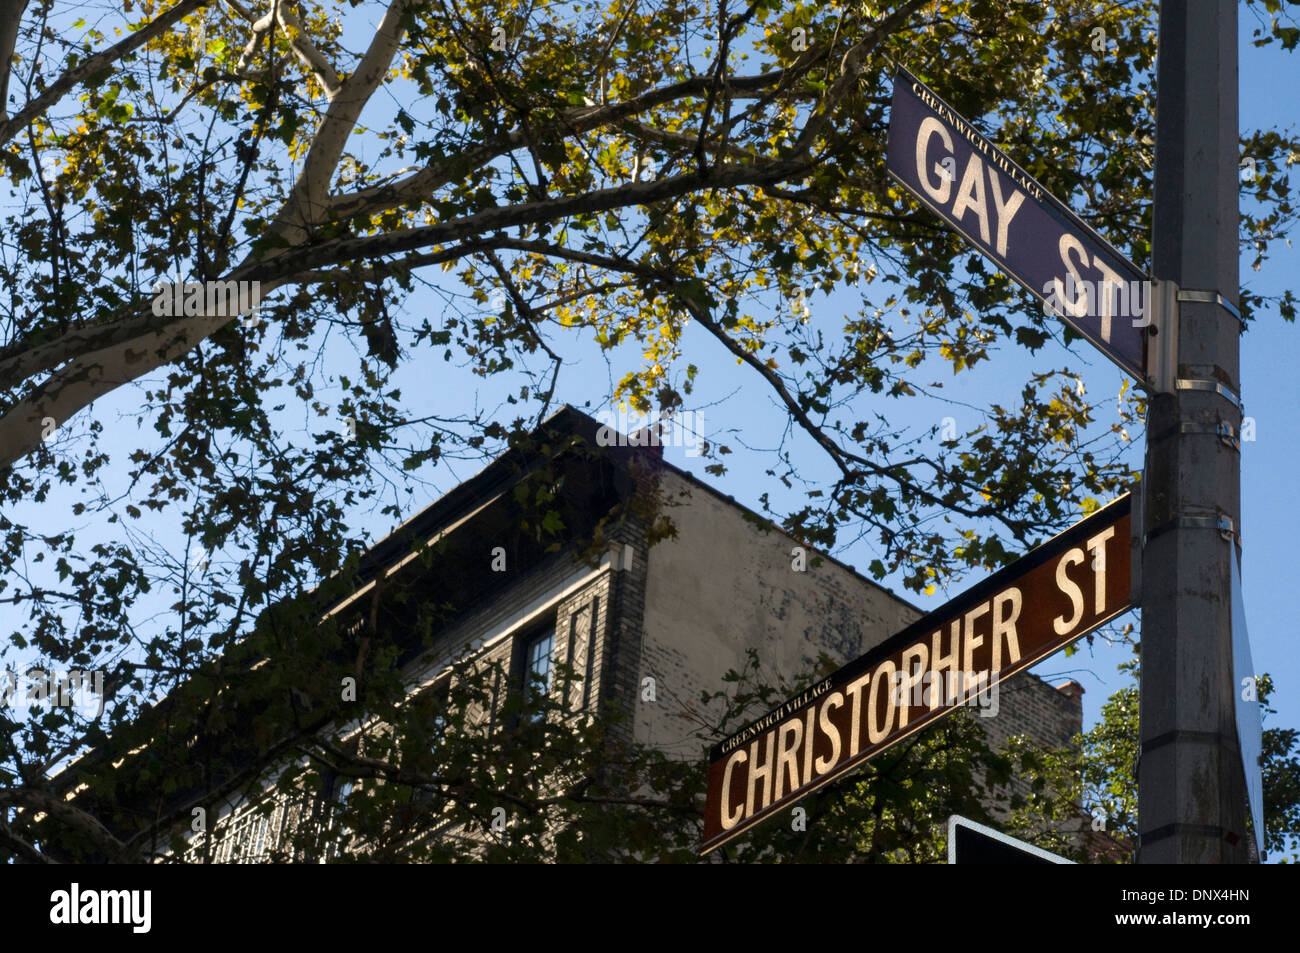 Gay Street in Greenwich Village. At the end of this tiny street in the St Christopher; 15; was until early 2009 the famous Oscar Wilde Bookshop bookstore specializing in gay themed on the world and served as a reference and resistance to the homosexual movement for many years; although Gay Street itself and attracts many curious only to photograph the sign; even sell postcards and pictures of the sign. Stock Photo